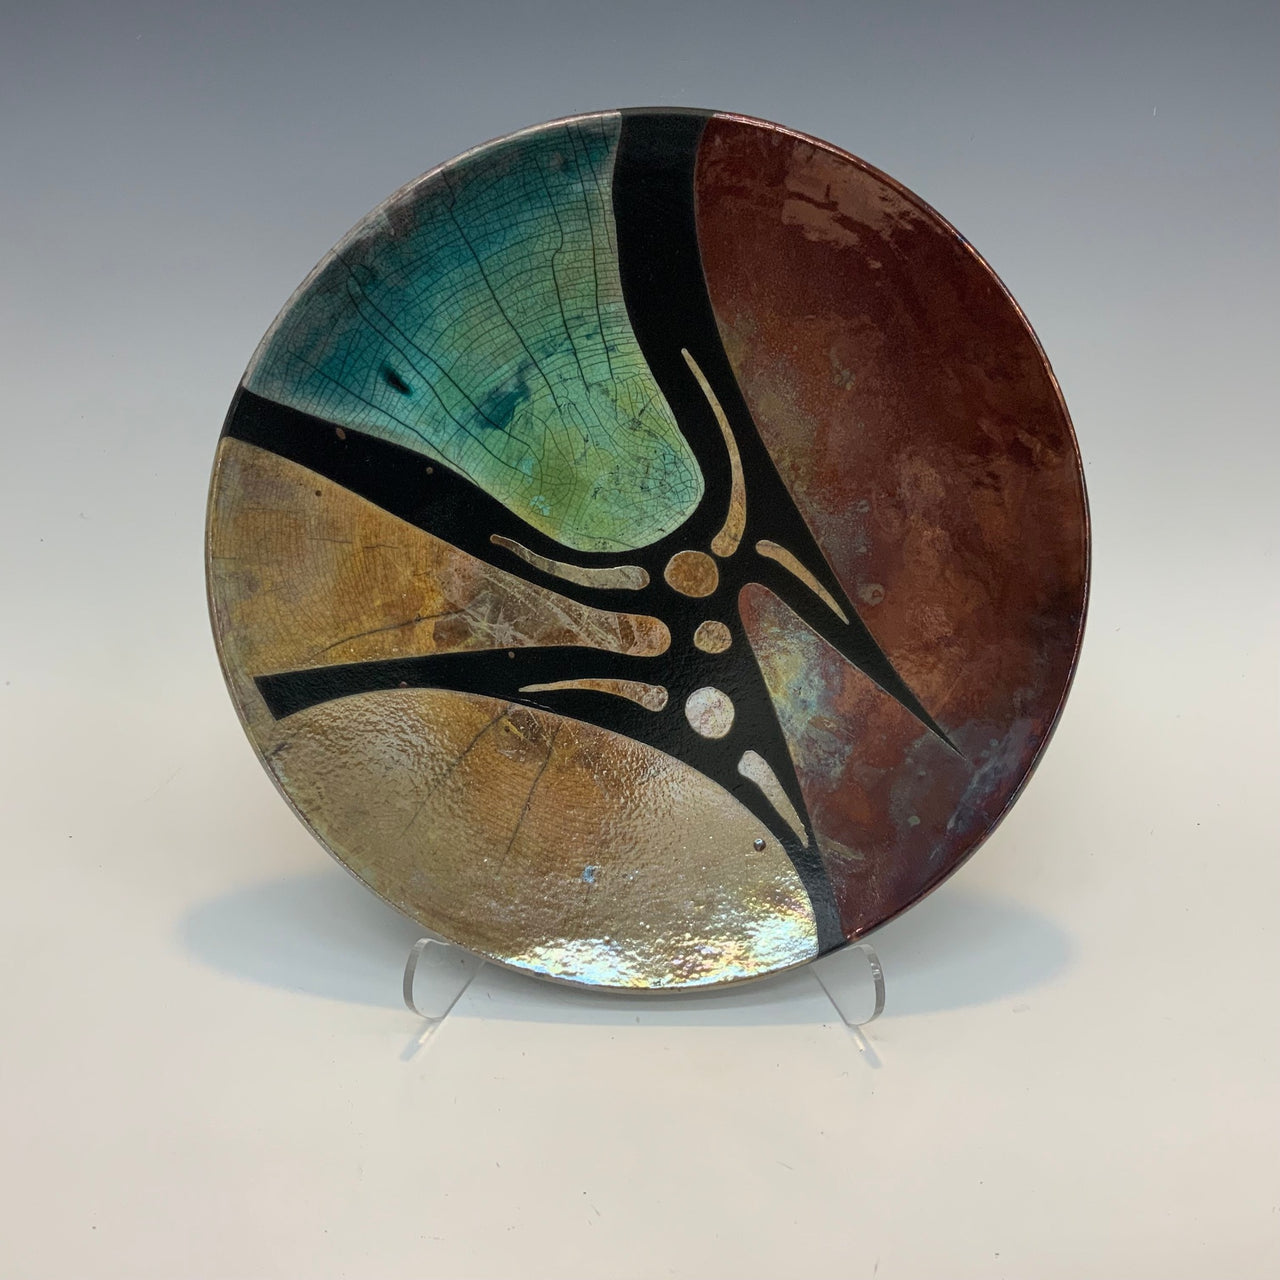 Raku plate in gold copper and teal